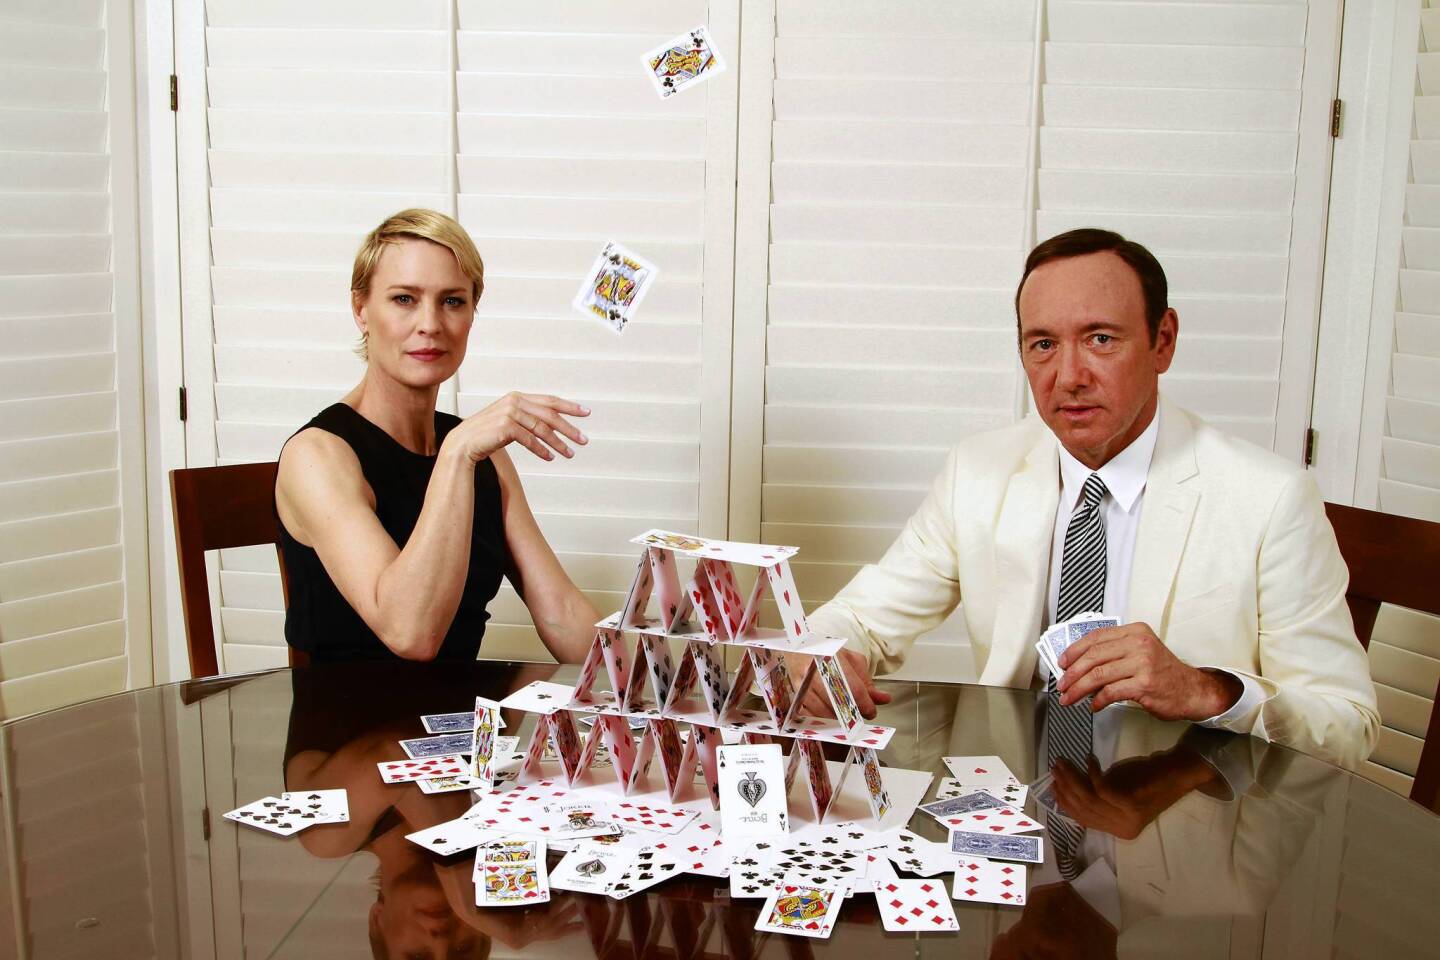 Kevin Spacey and Robin Wright star in the Netflix series "House of Cards," which looks at political gamesmanship in Washington.